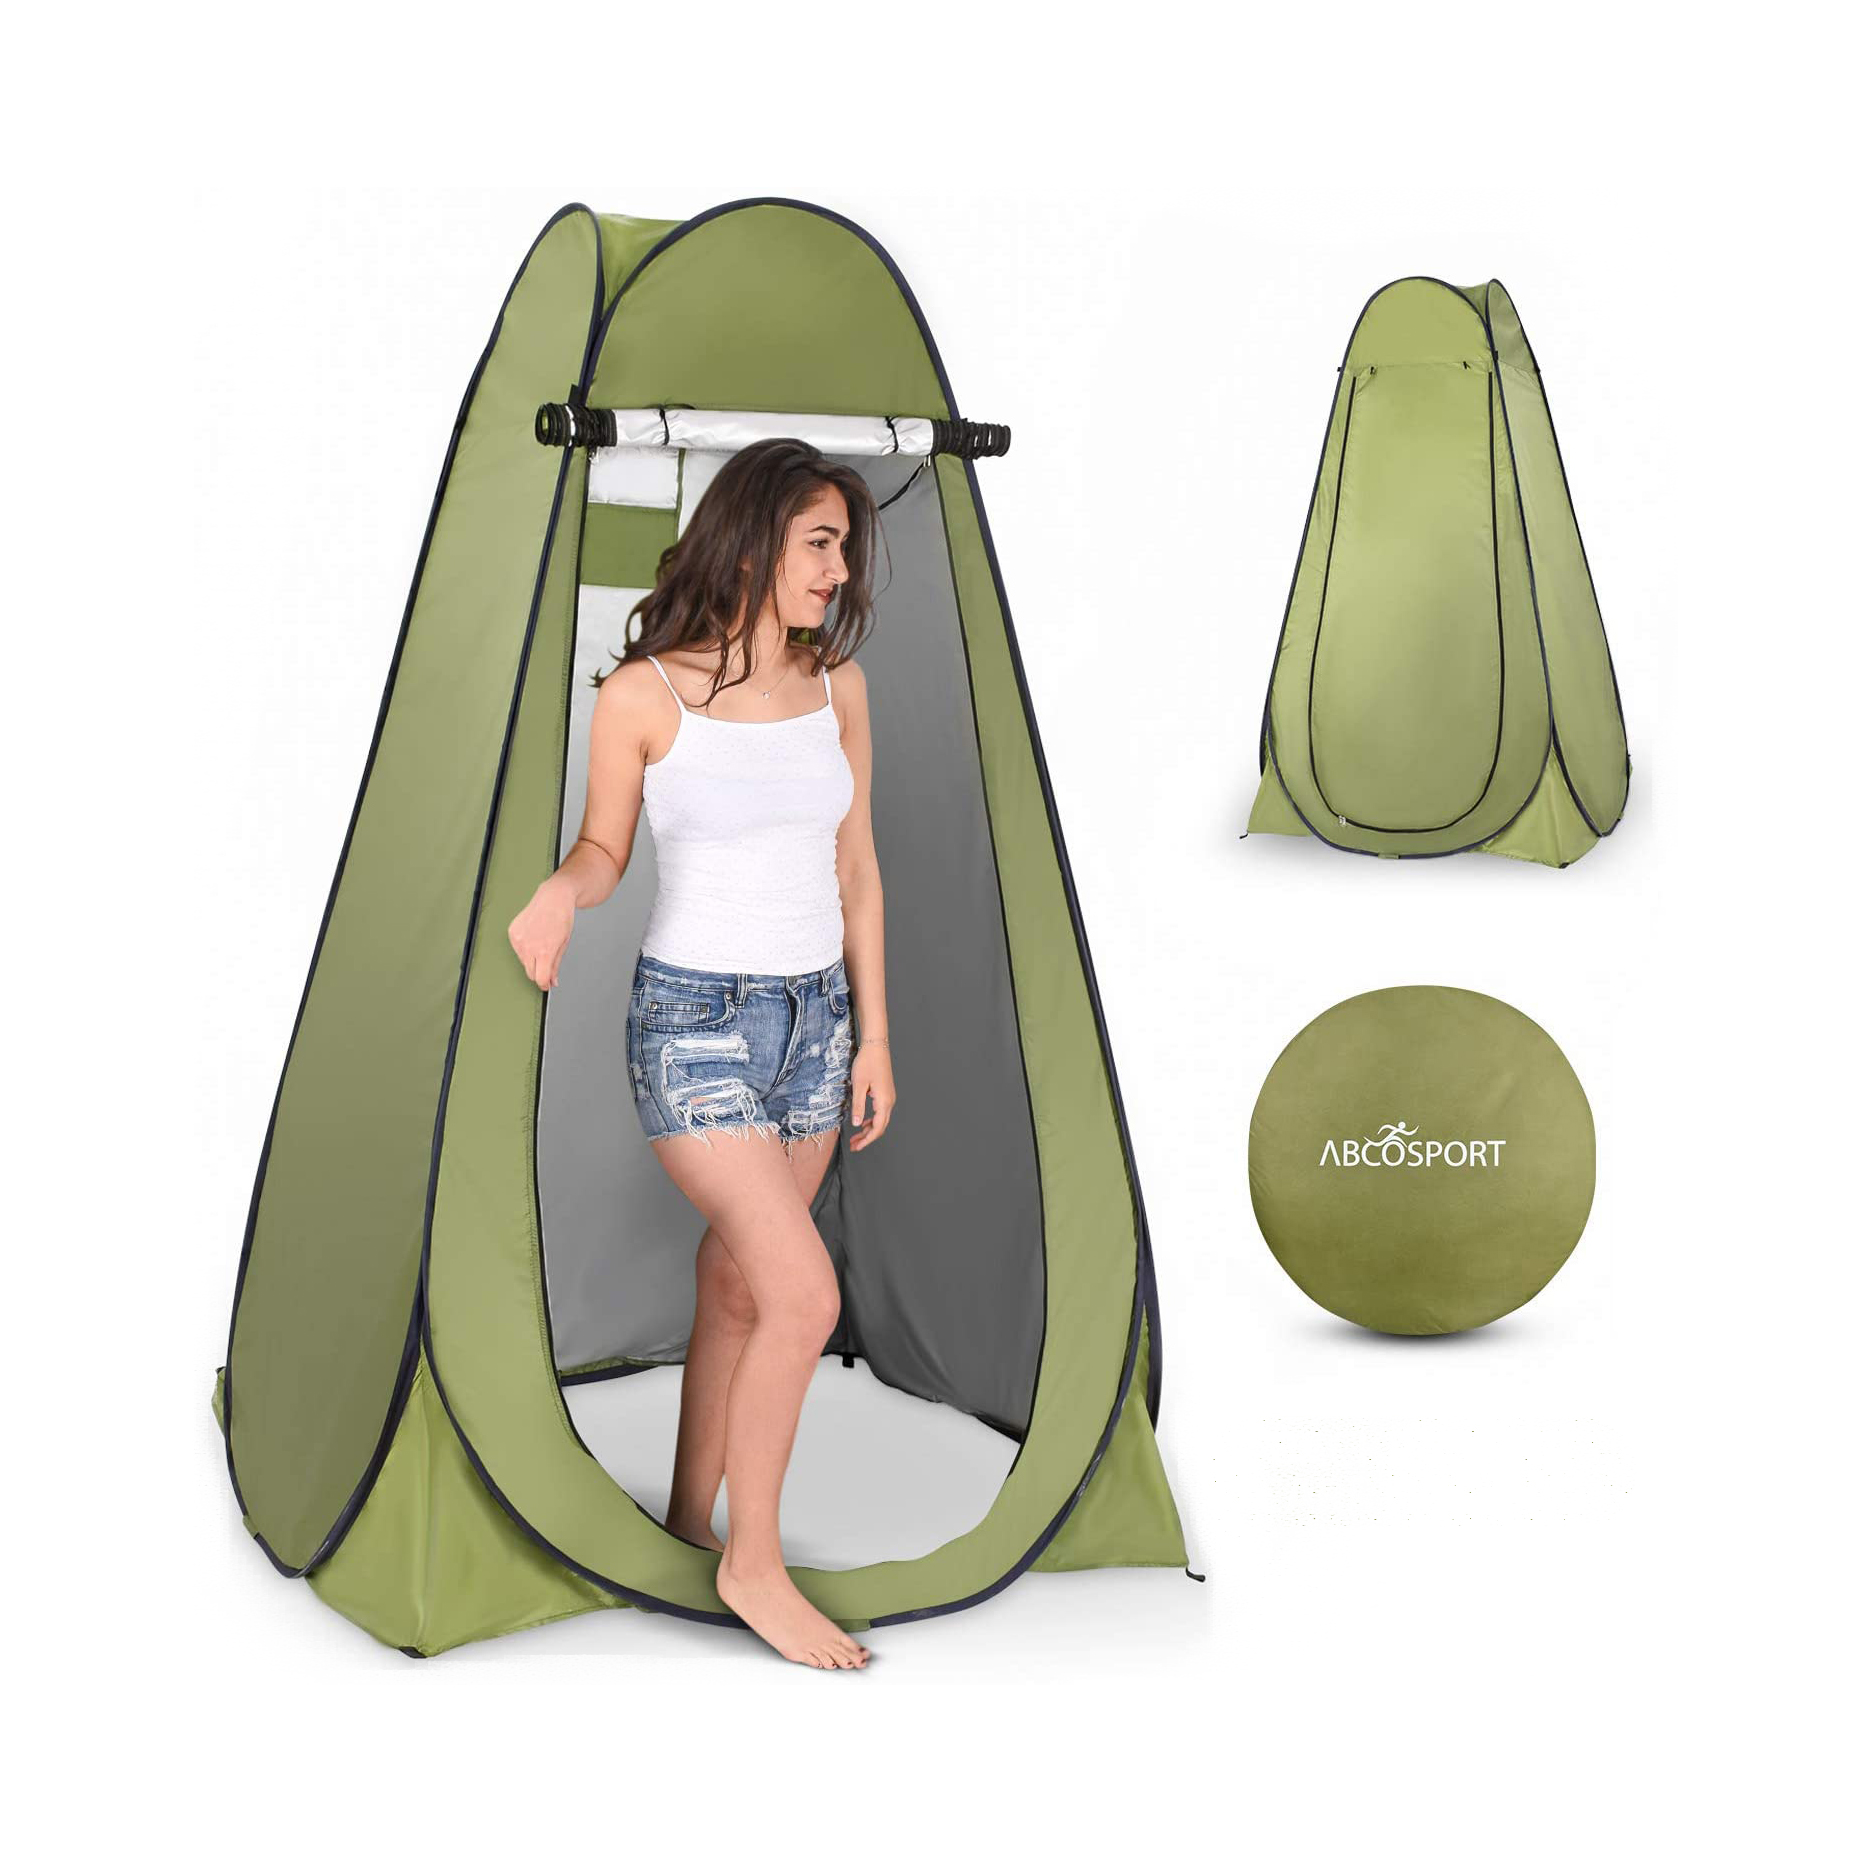 11 Best Pop Up Privacy Tents: Compare & Save (2022) | Heavy.com